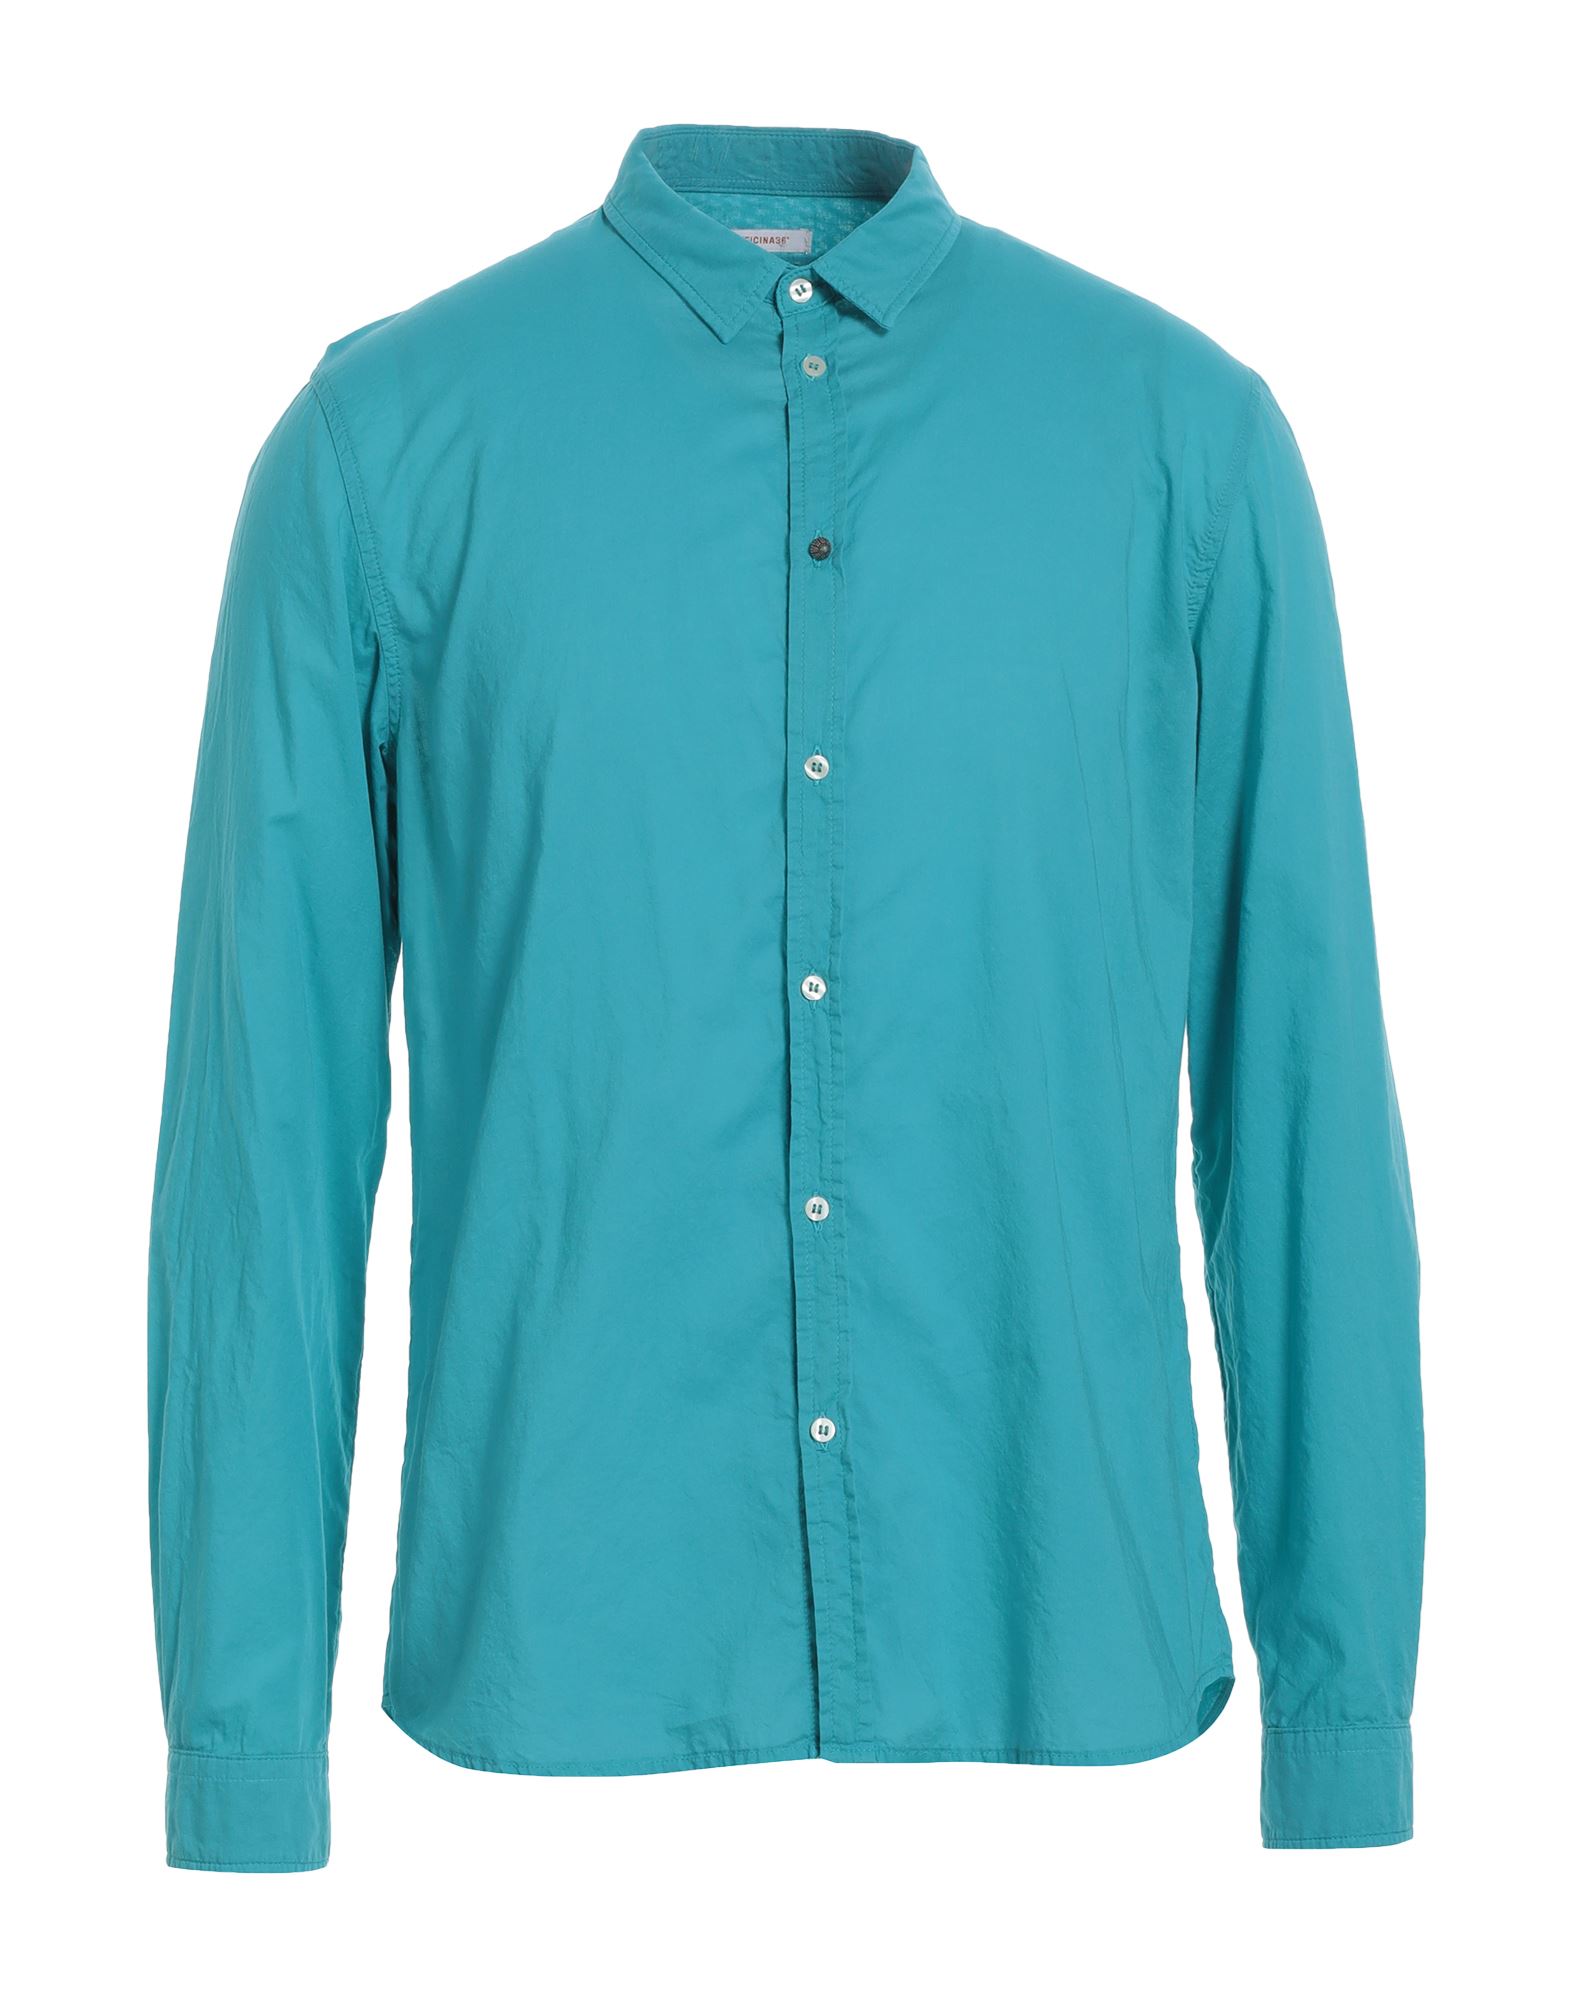 OFFICINA 36 OFFICINA 36 MAN SHIRT TURQUOISE SIZE S COTTON